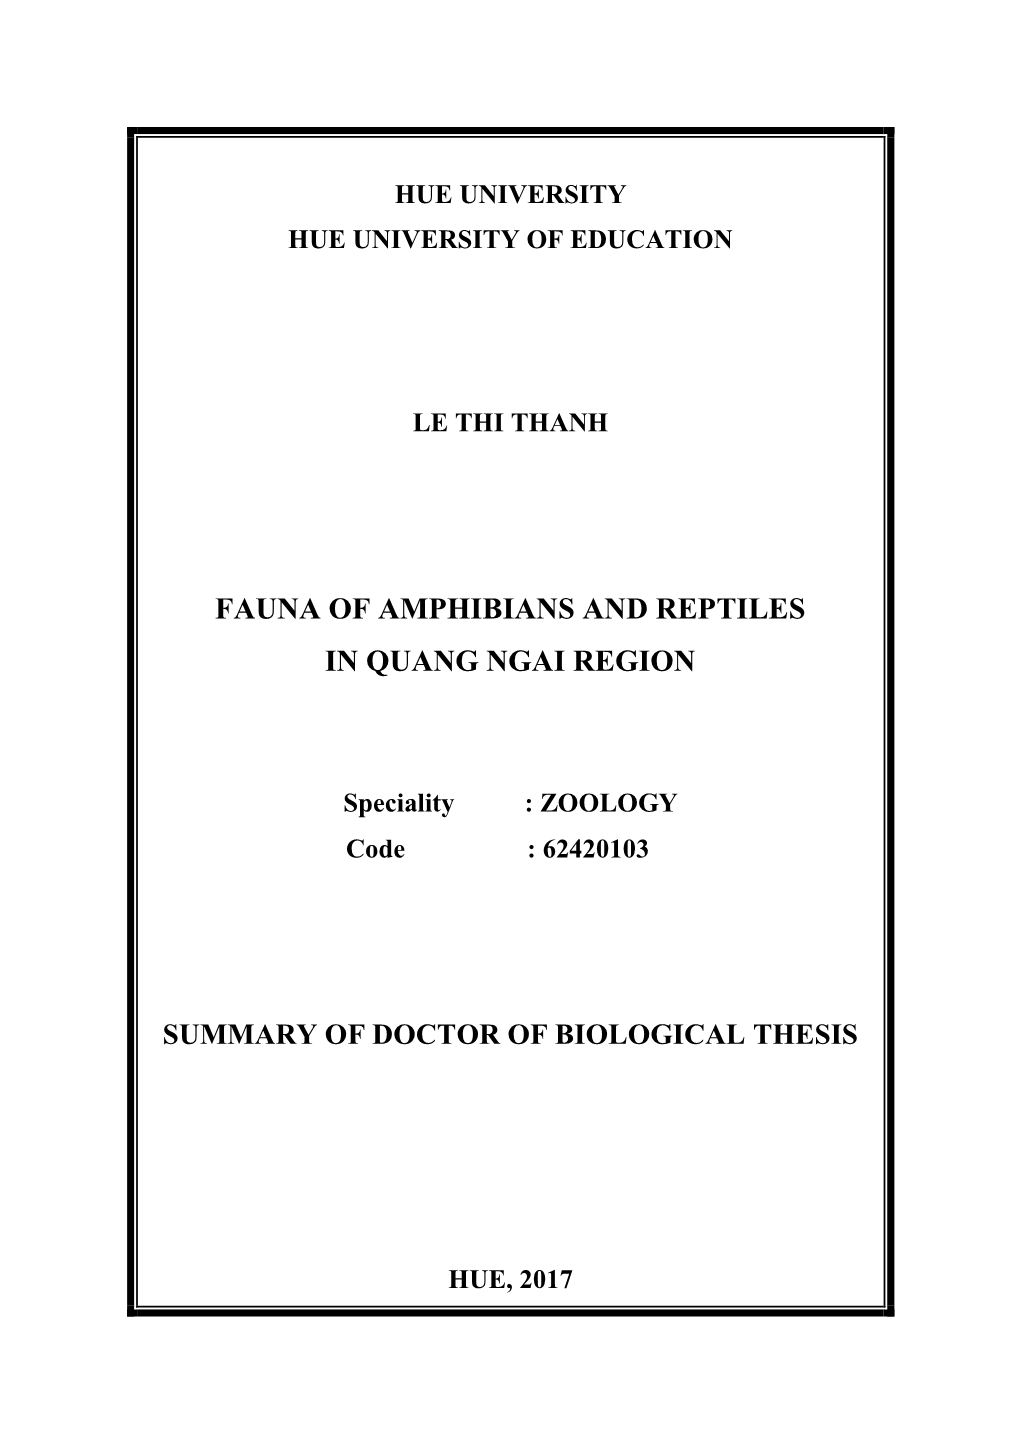 Fauna of Amphibians and Reptiles in Quang Ngai Region